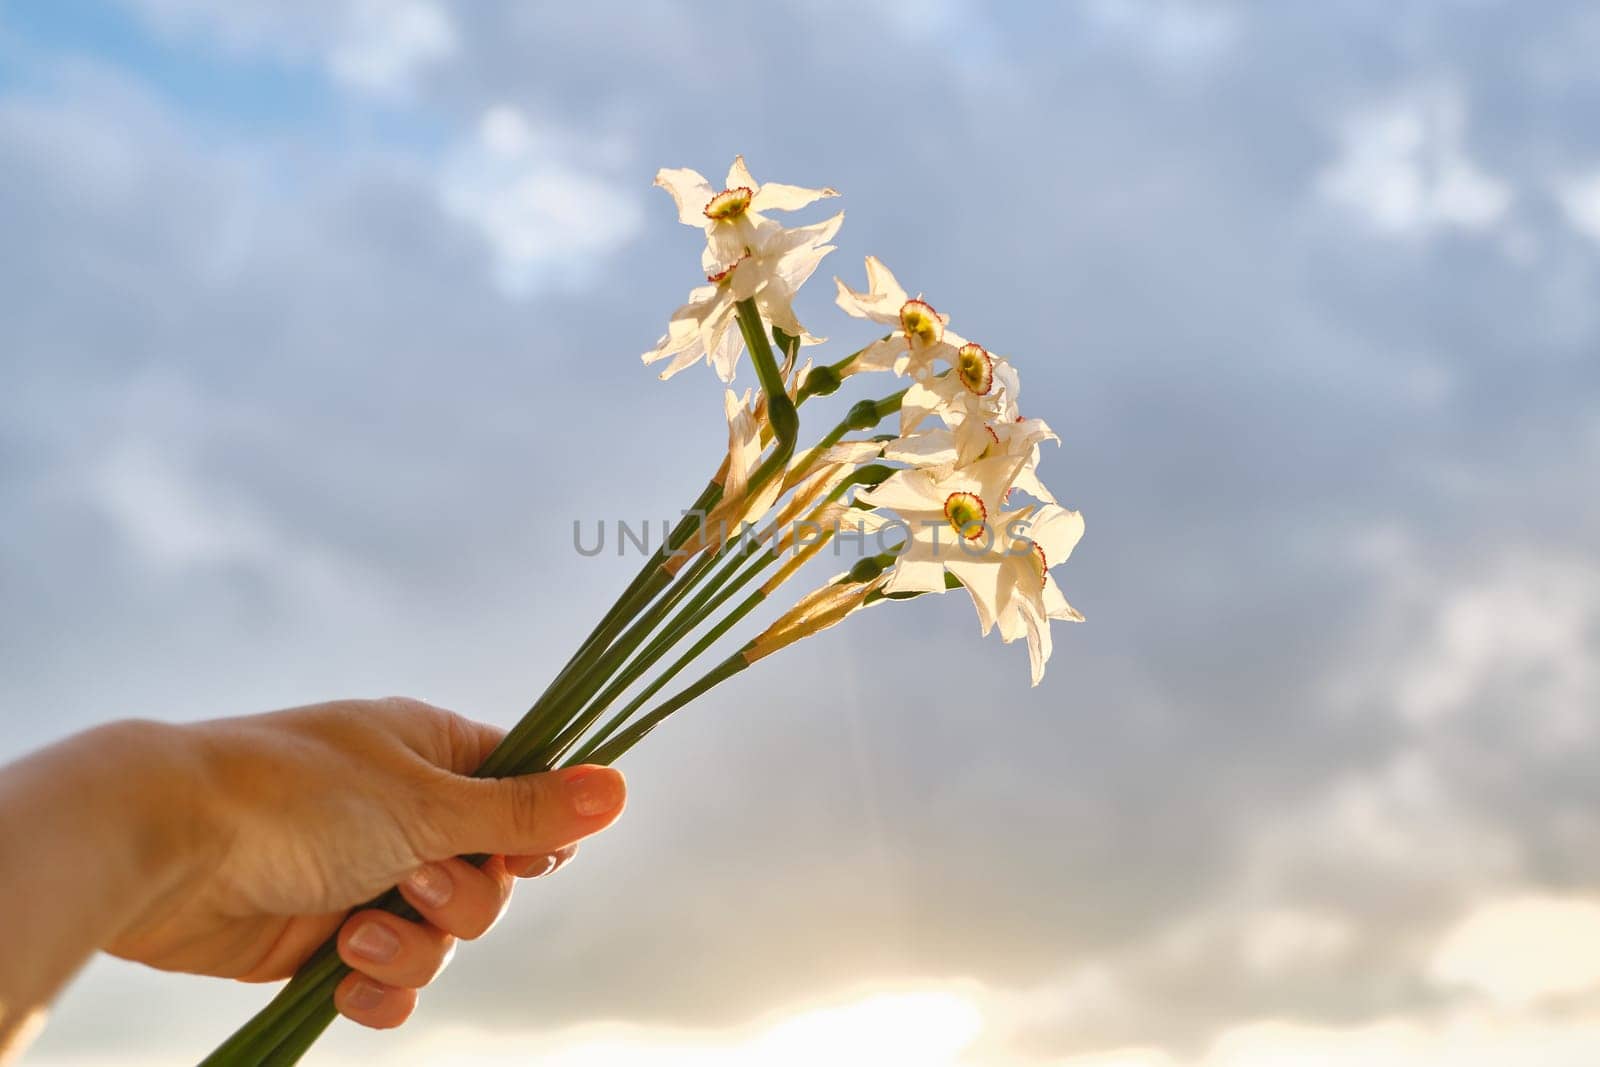 Bouquet of white spring flowers of daffodils in hand, flowers beginning to fade, background dramatic,evening sunset sky with clouds